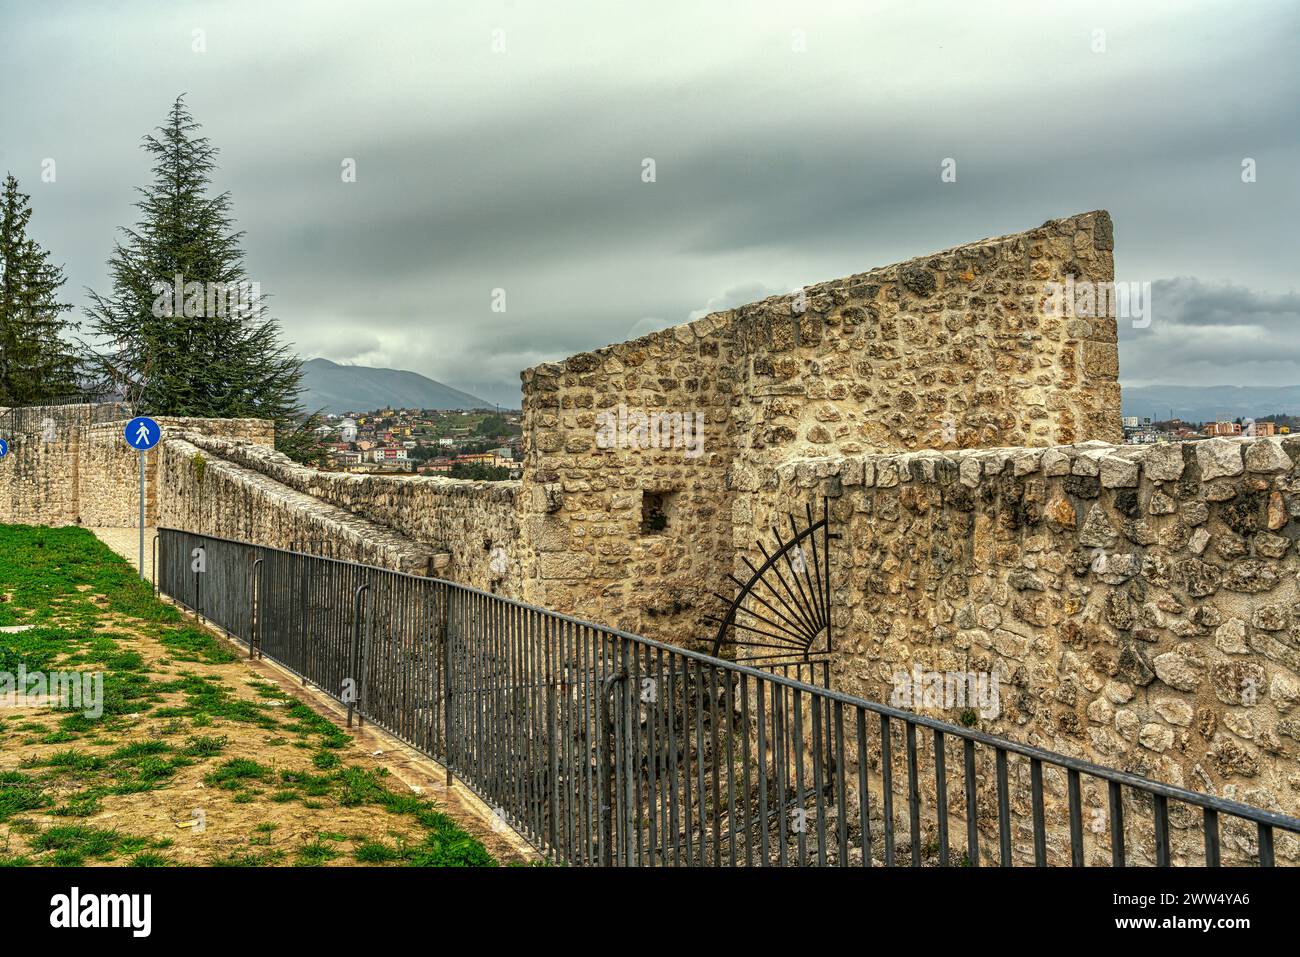 The remains of the city walls of the city of L'Aquila. L'Aquila, Abruzzo, Italy, Europe Stock Photo